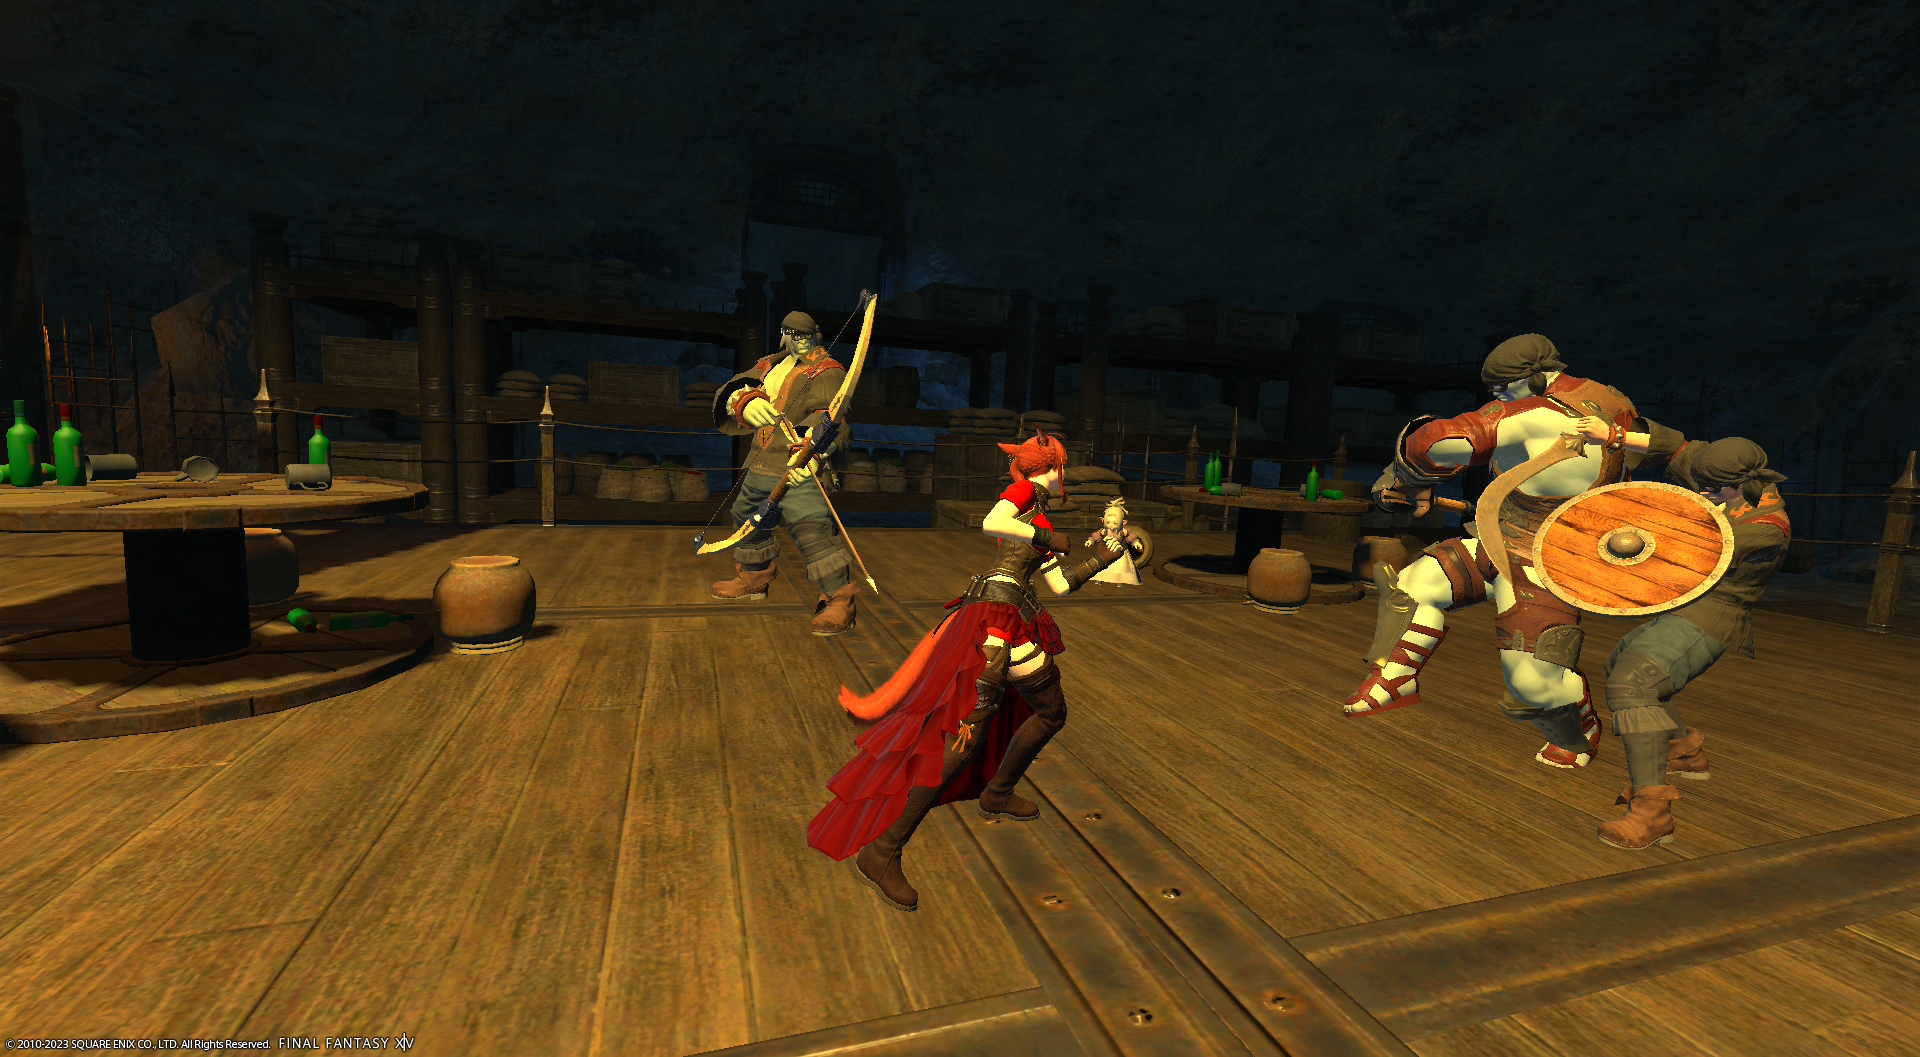 An FFXIV screenshot. A miqote is participating in a bar fight.